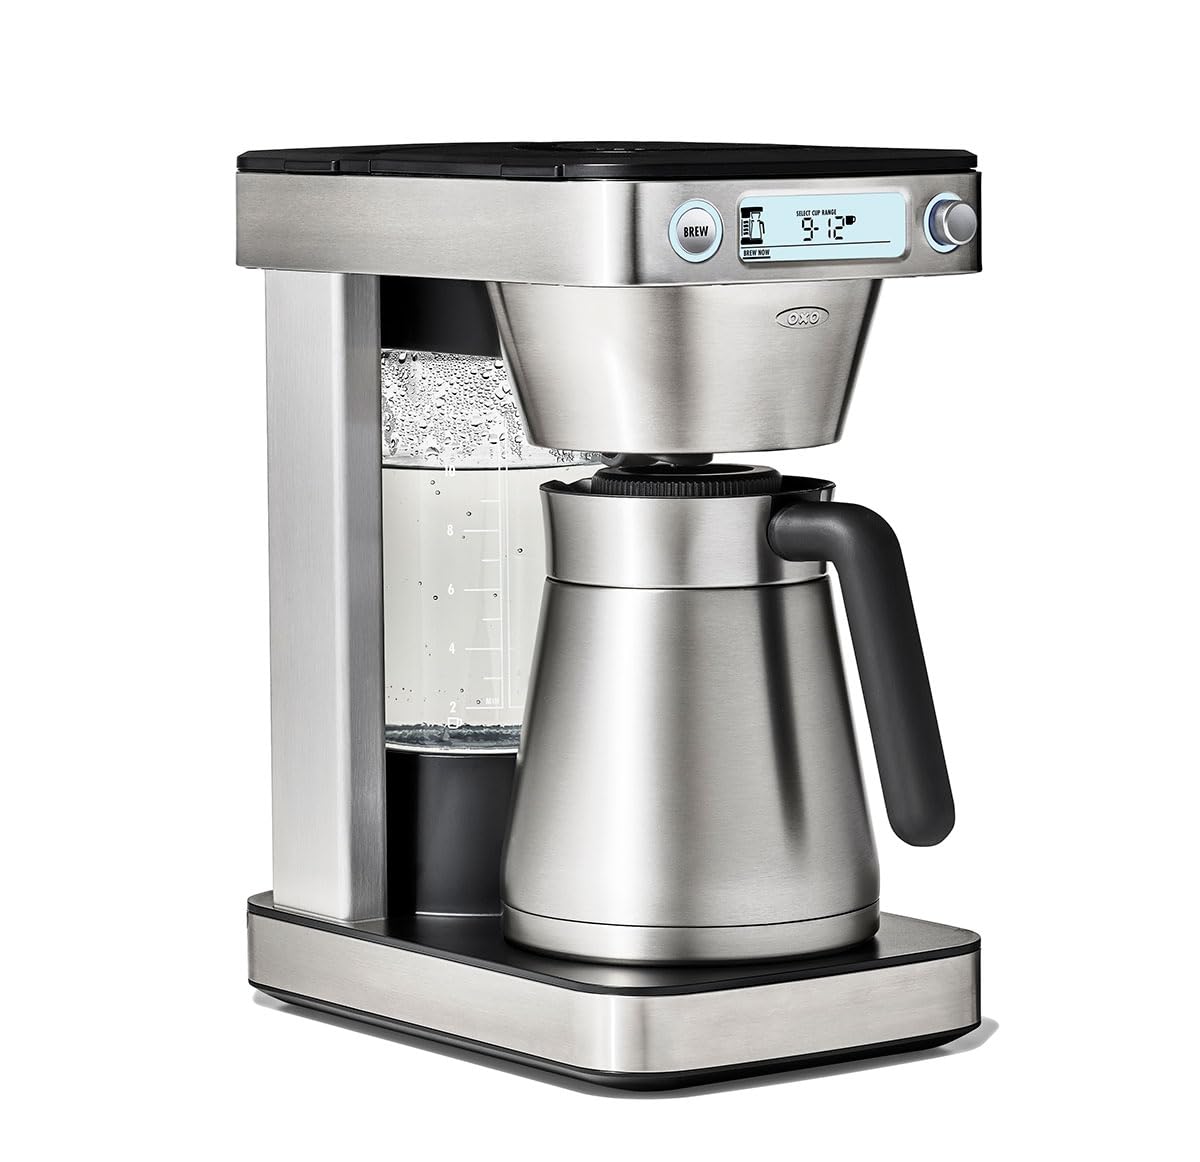 OXO Brew 12-Cup Coffee Maker